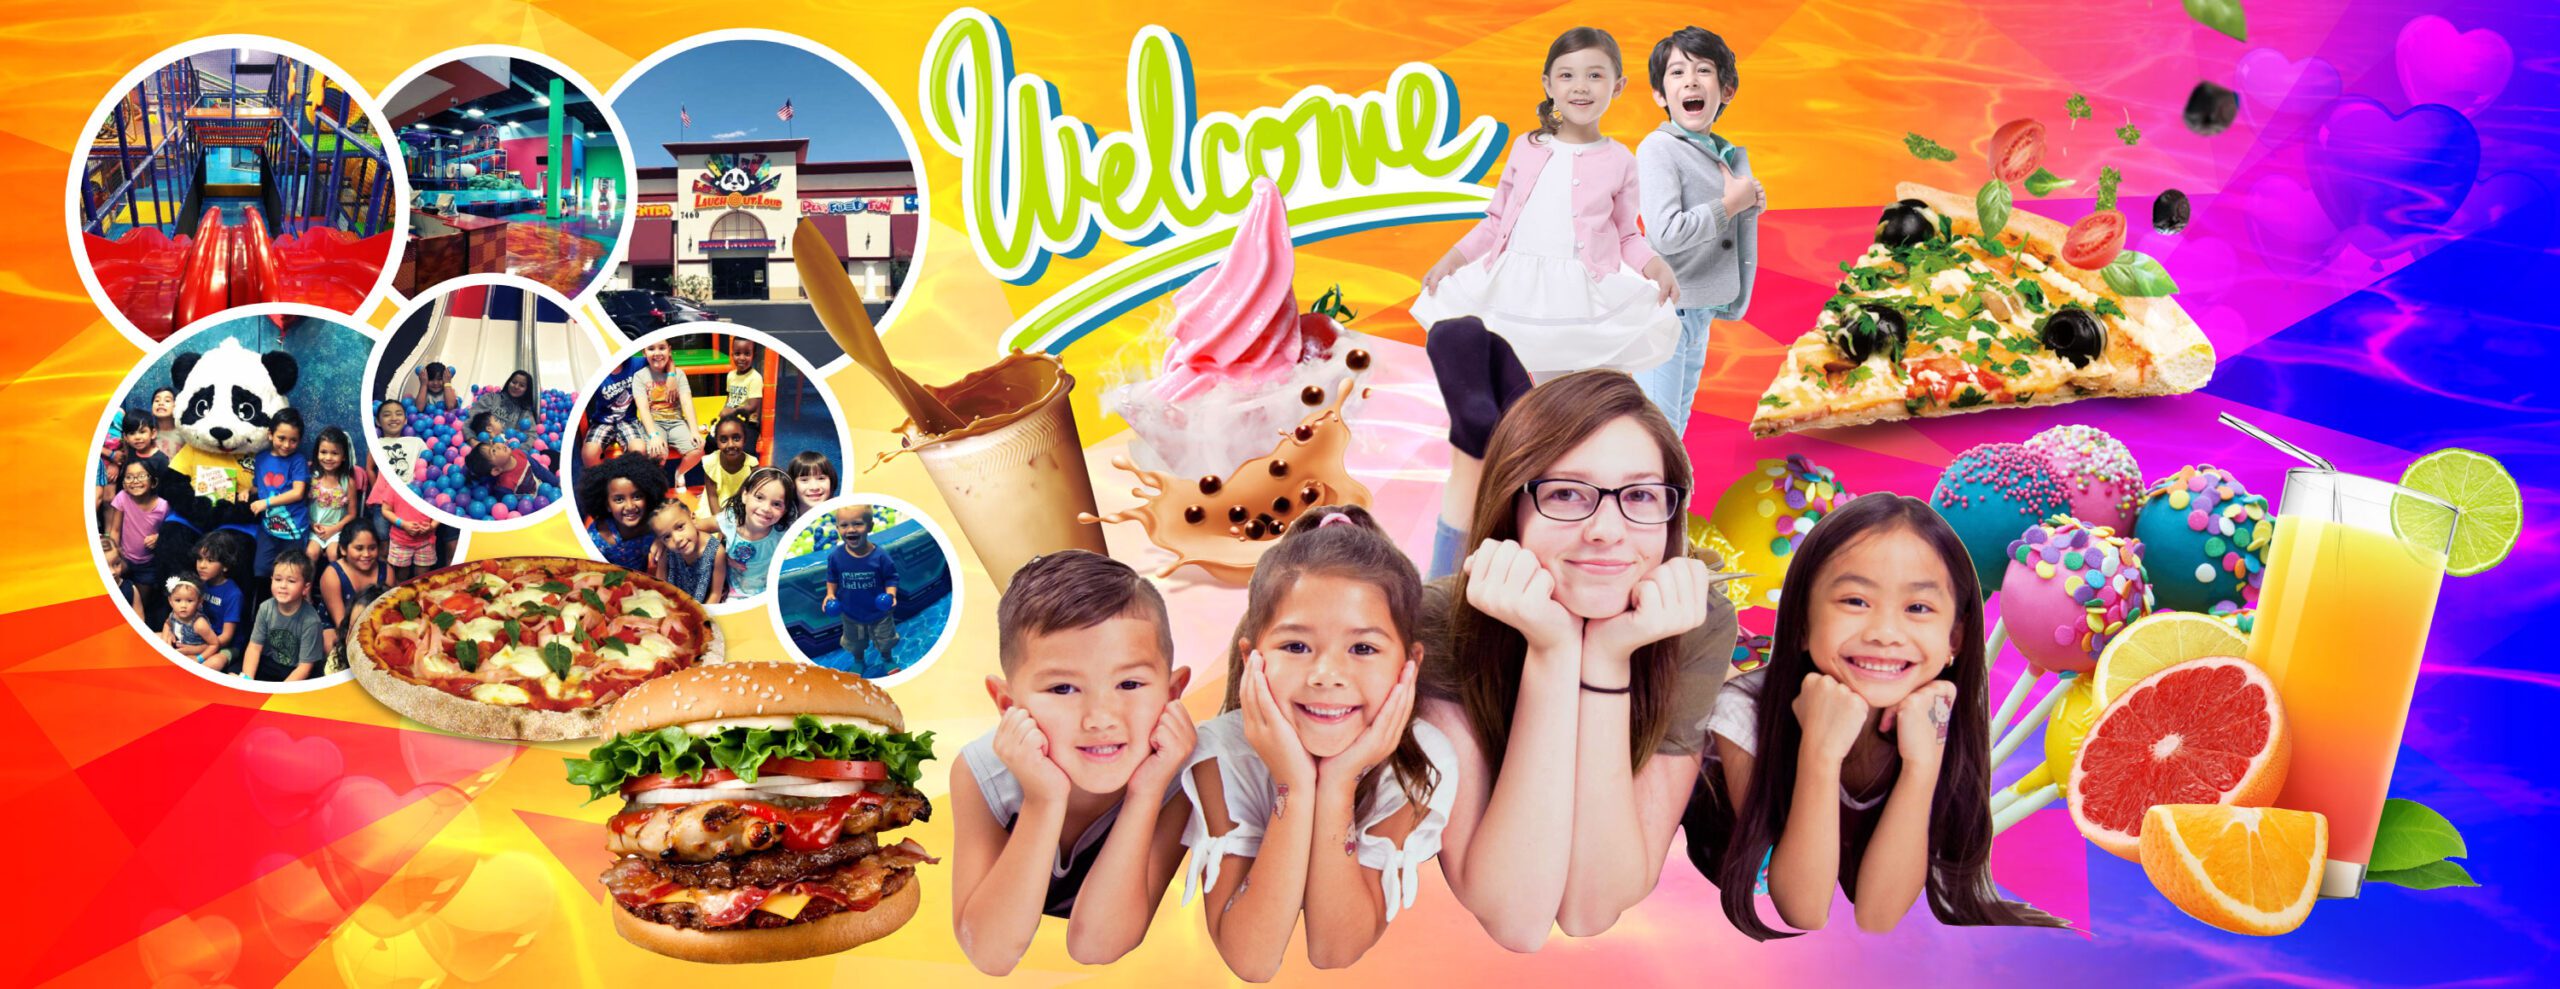 LOL Kids Club is a premier indoor playground family entertainment and event center with locations in Las Vegas, Ontario, and Yucaipa